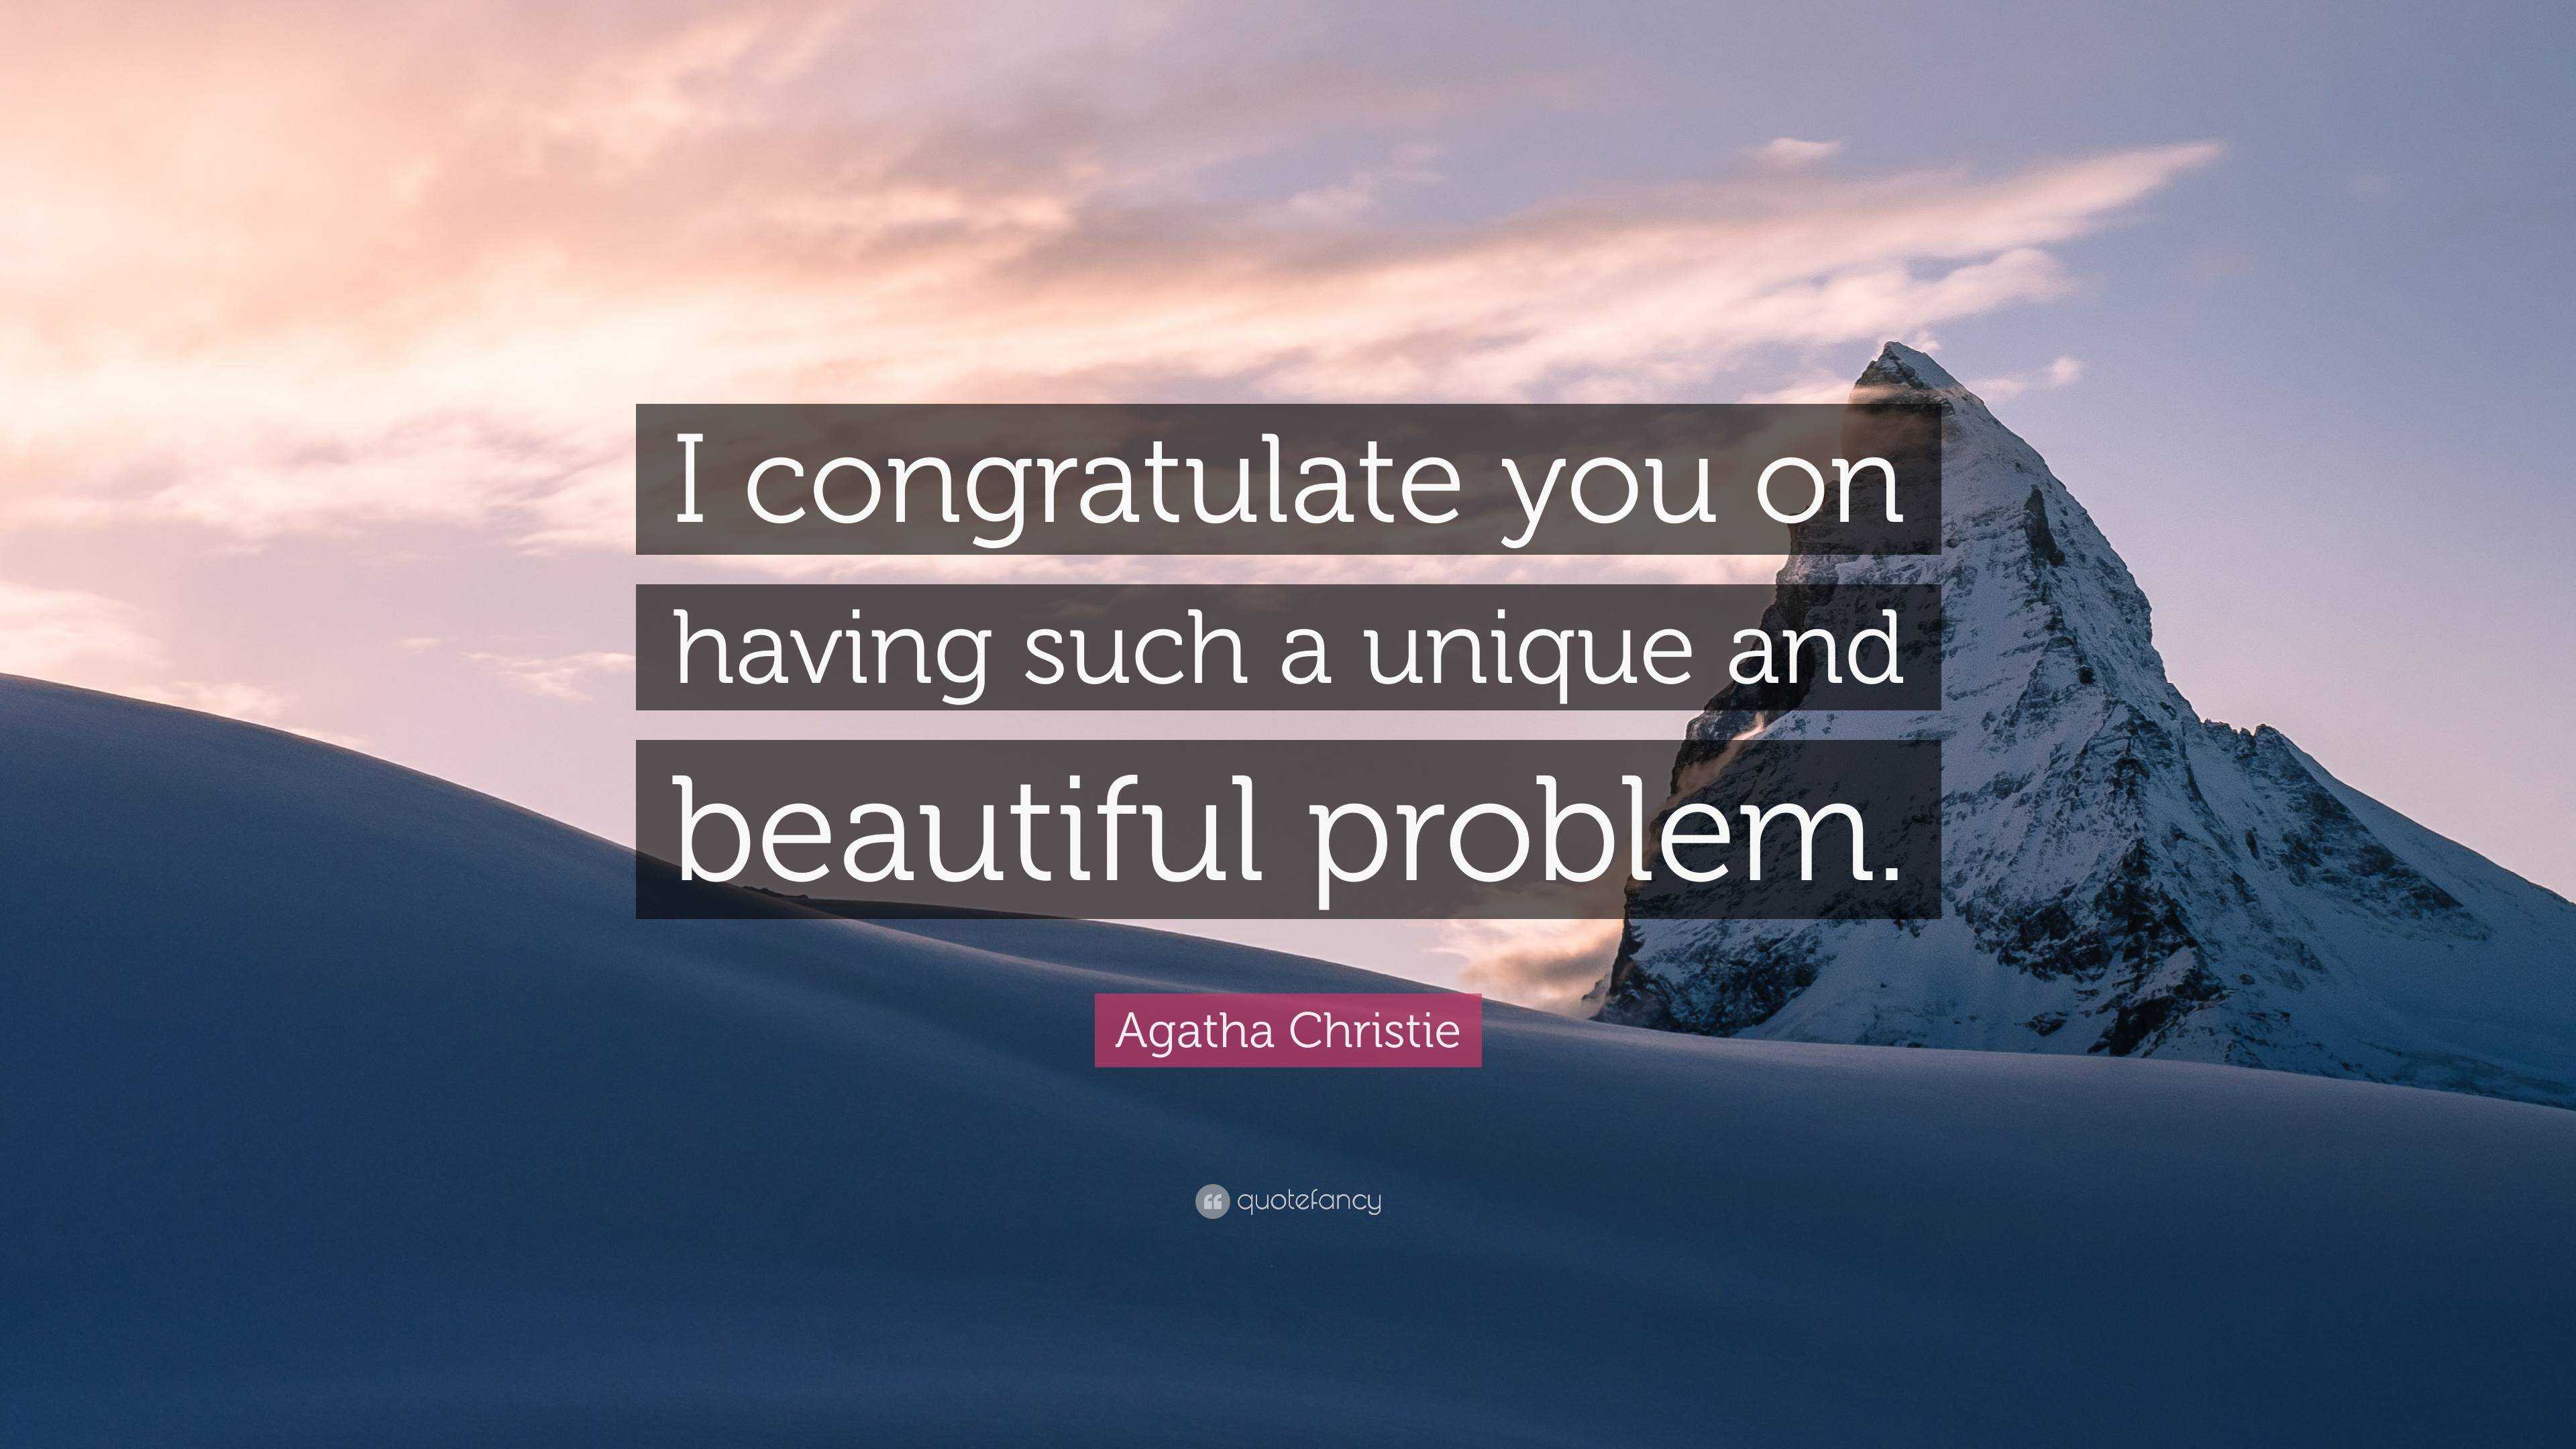 Agatha Christie Quote: “I congratulate you on having such a unique and  beautiful problem.”